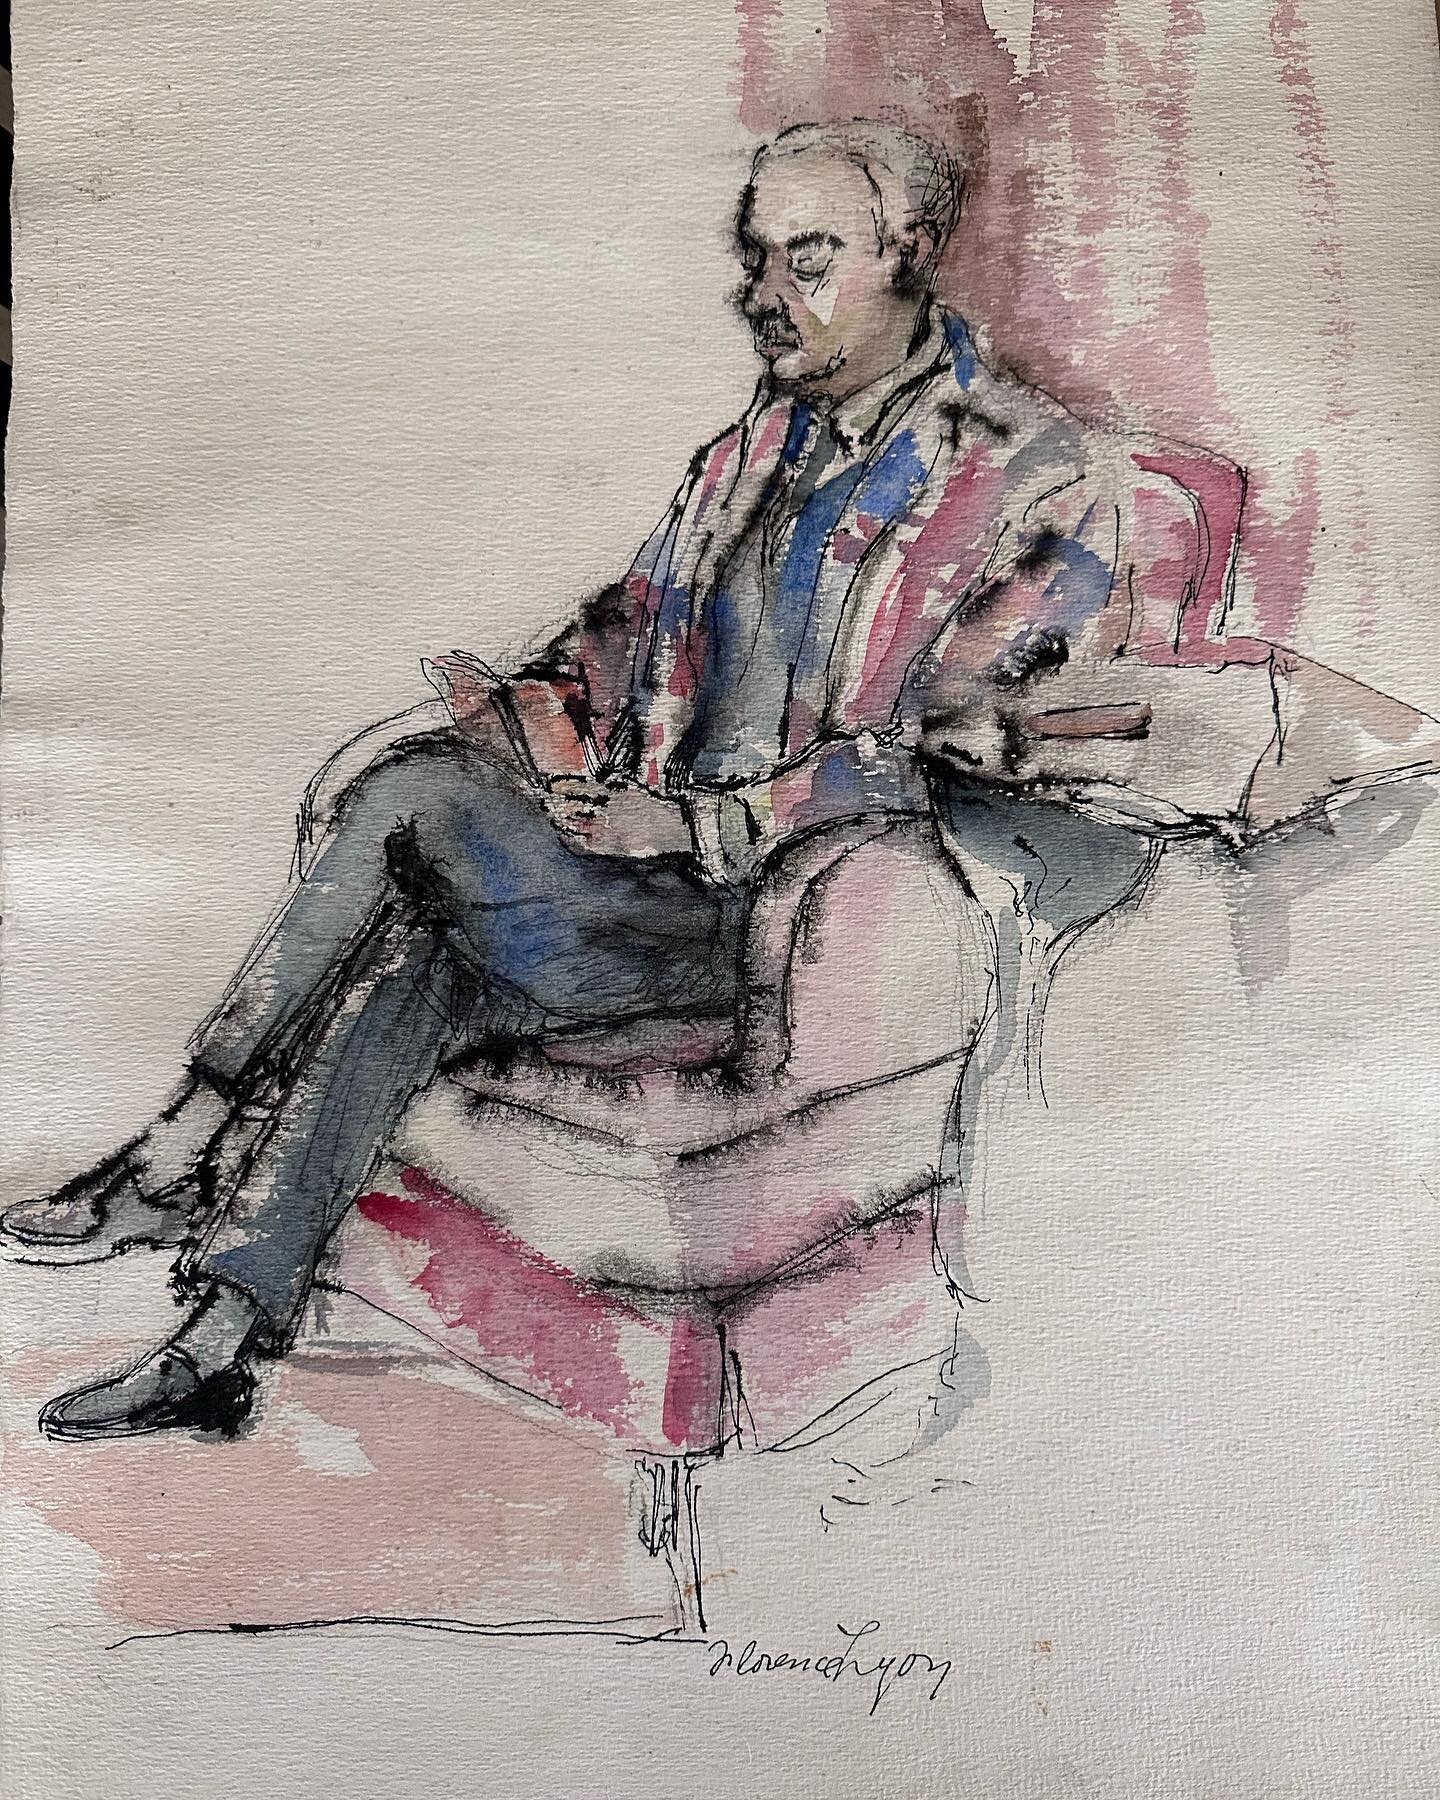 Untitled 
Original Watercolor &amp; Ink
Signed:  Florence Lyon
Subject:  This portrait is of Leon Sircana, a former ambassador in Italy. Sircana was married to the artist&rsquo;s sister. 
14w x 19h
$175 plus shipping and tax
Pending